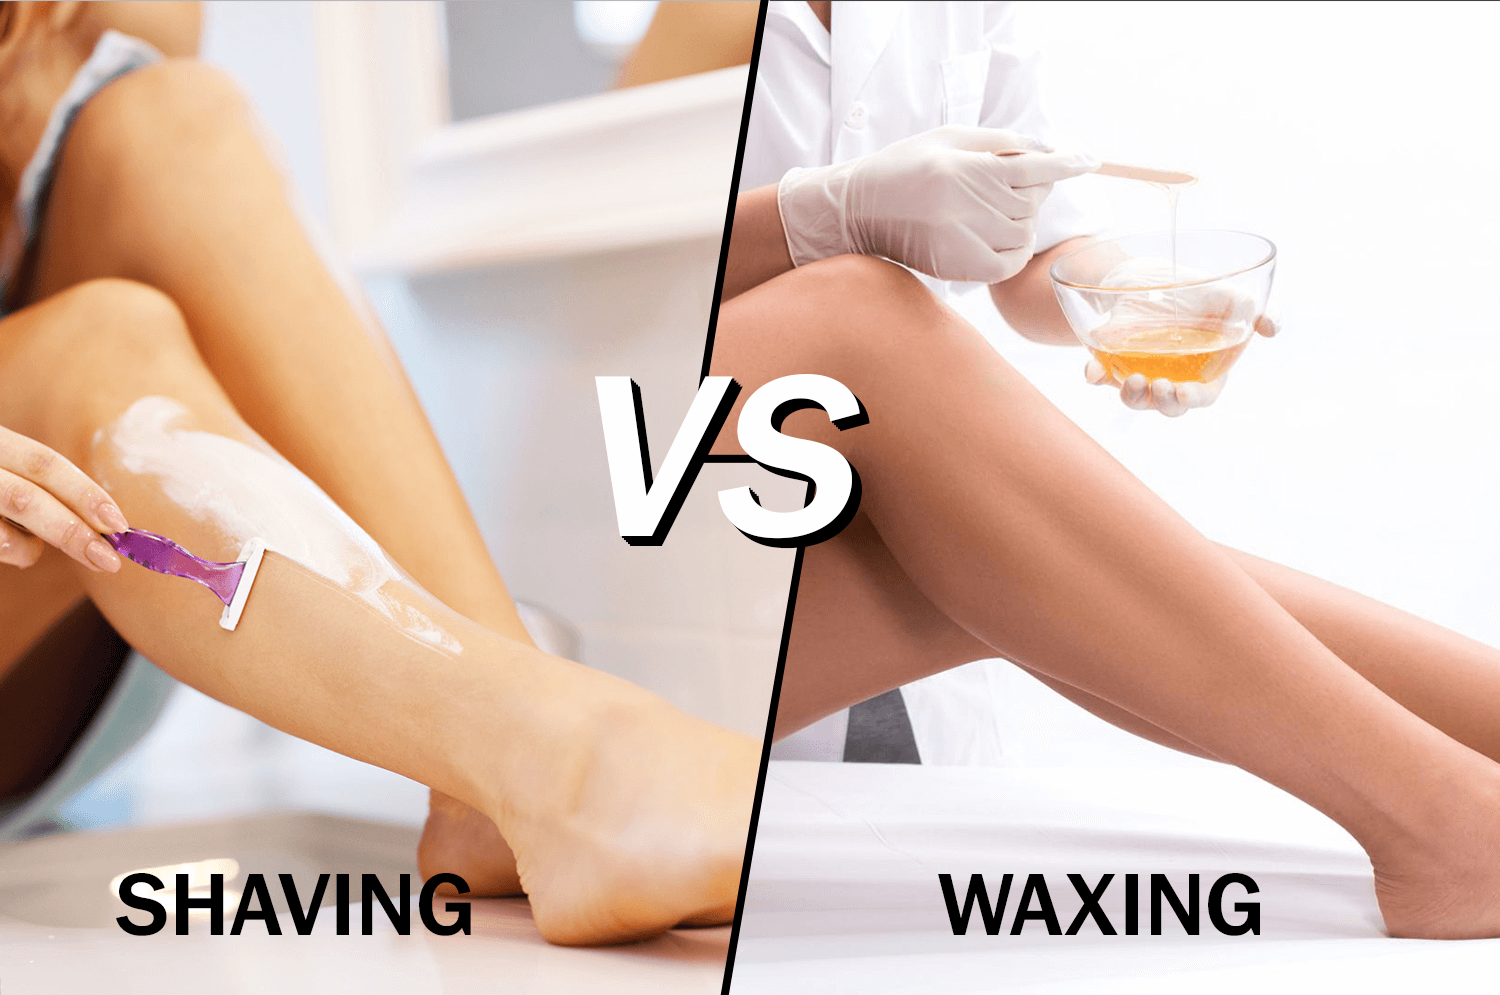 Discover Why A Greater Number Of People Choose To Wax Over Shaving